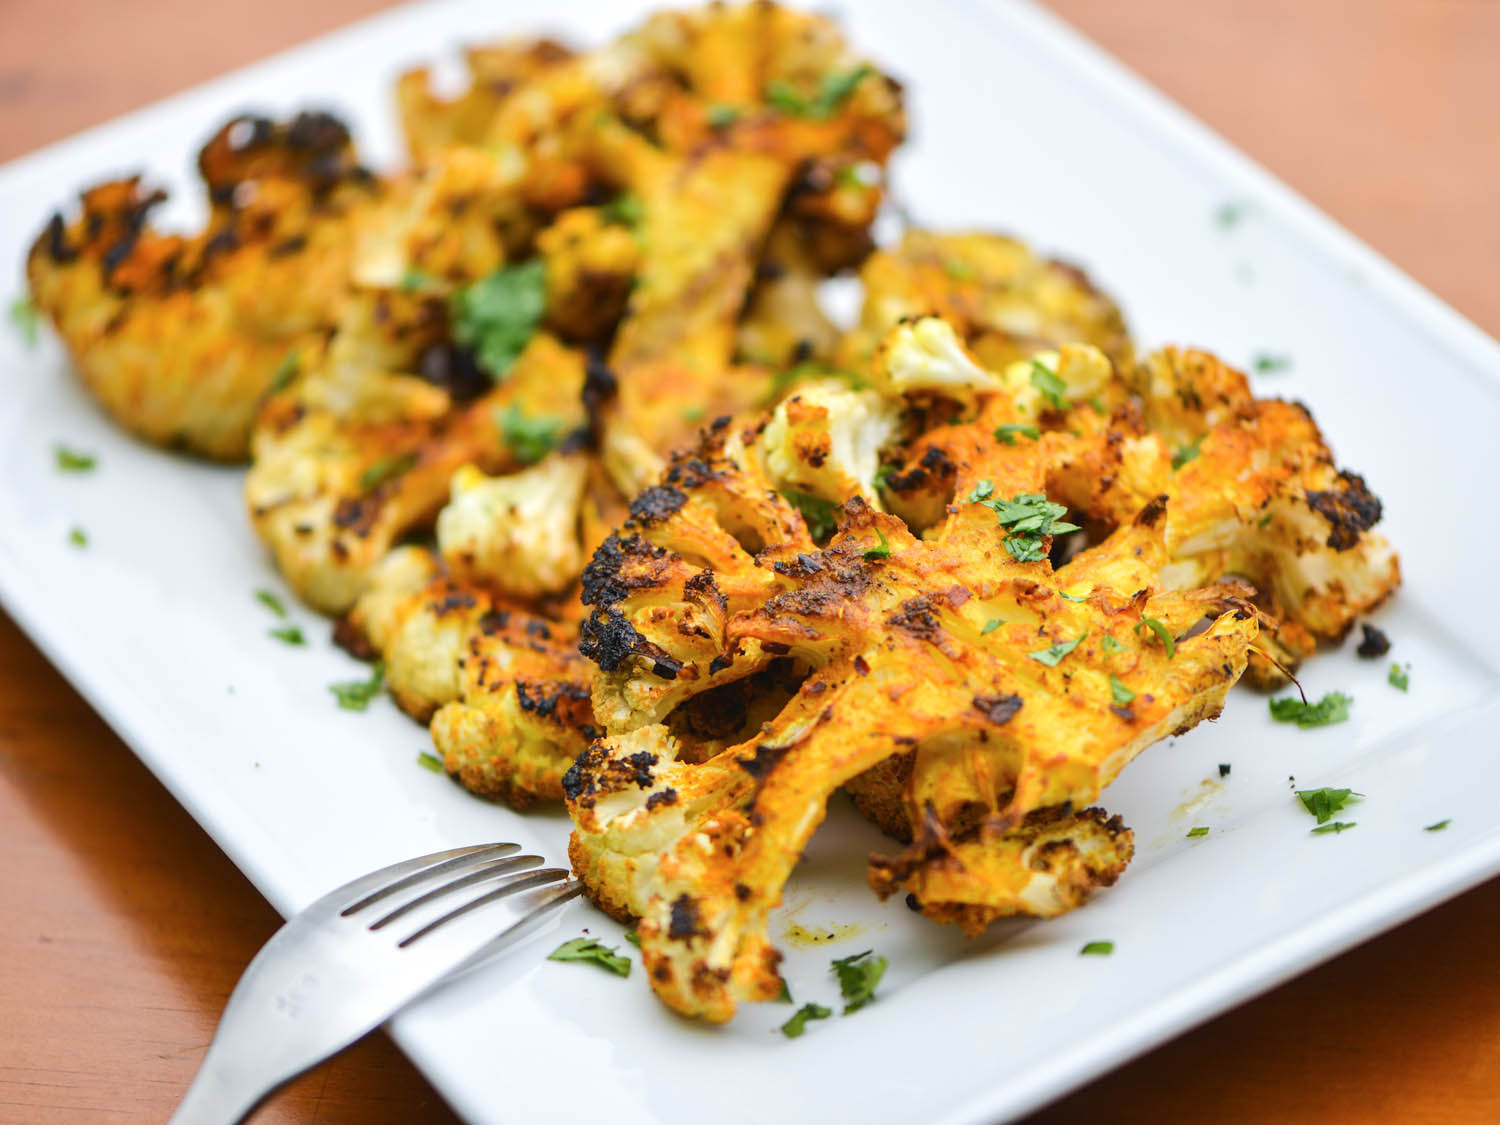 Indian Roasted Cauliflower Recipes
 Roasted Cauliflower With Indian Barbecue Sauce Recipe